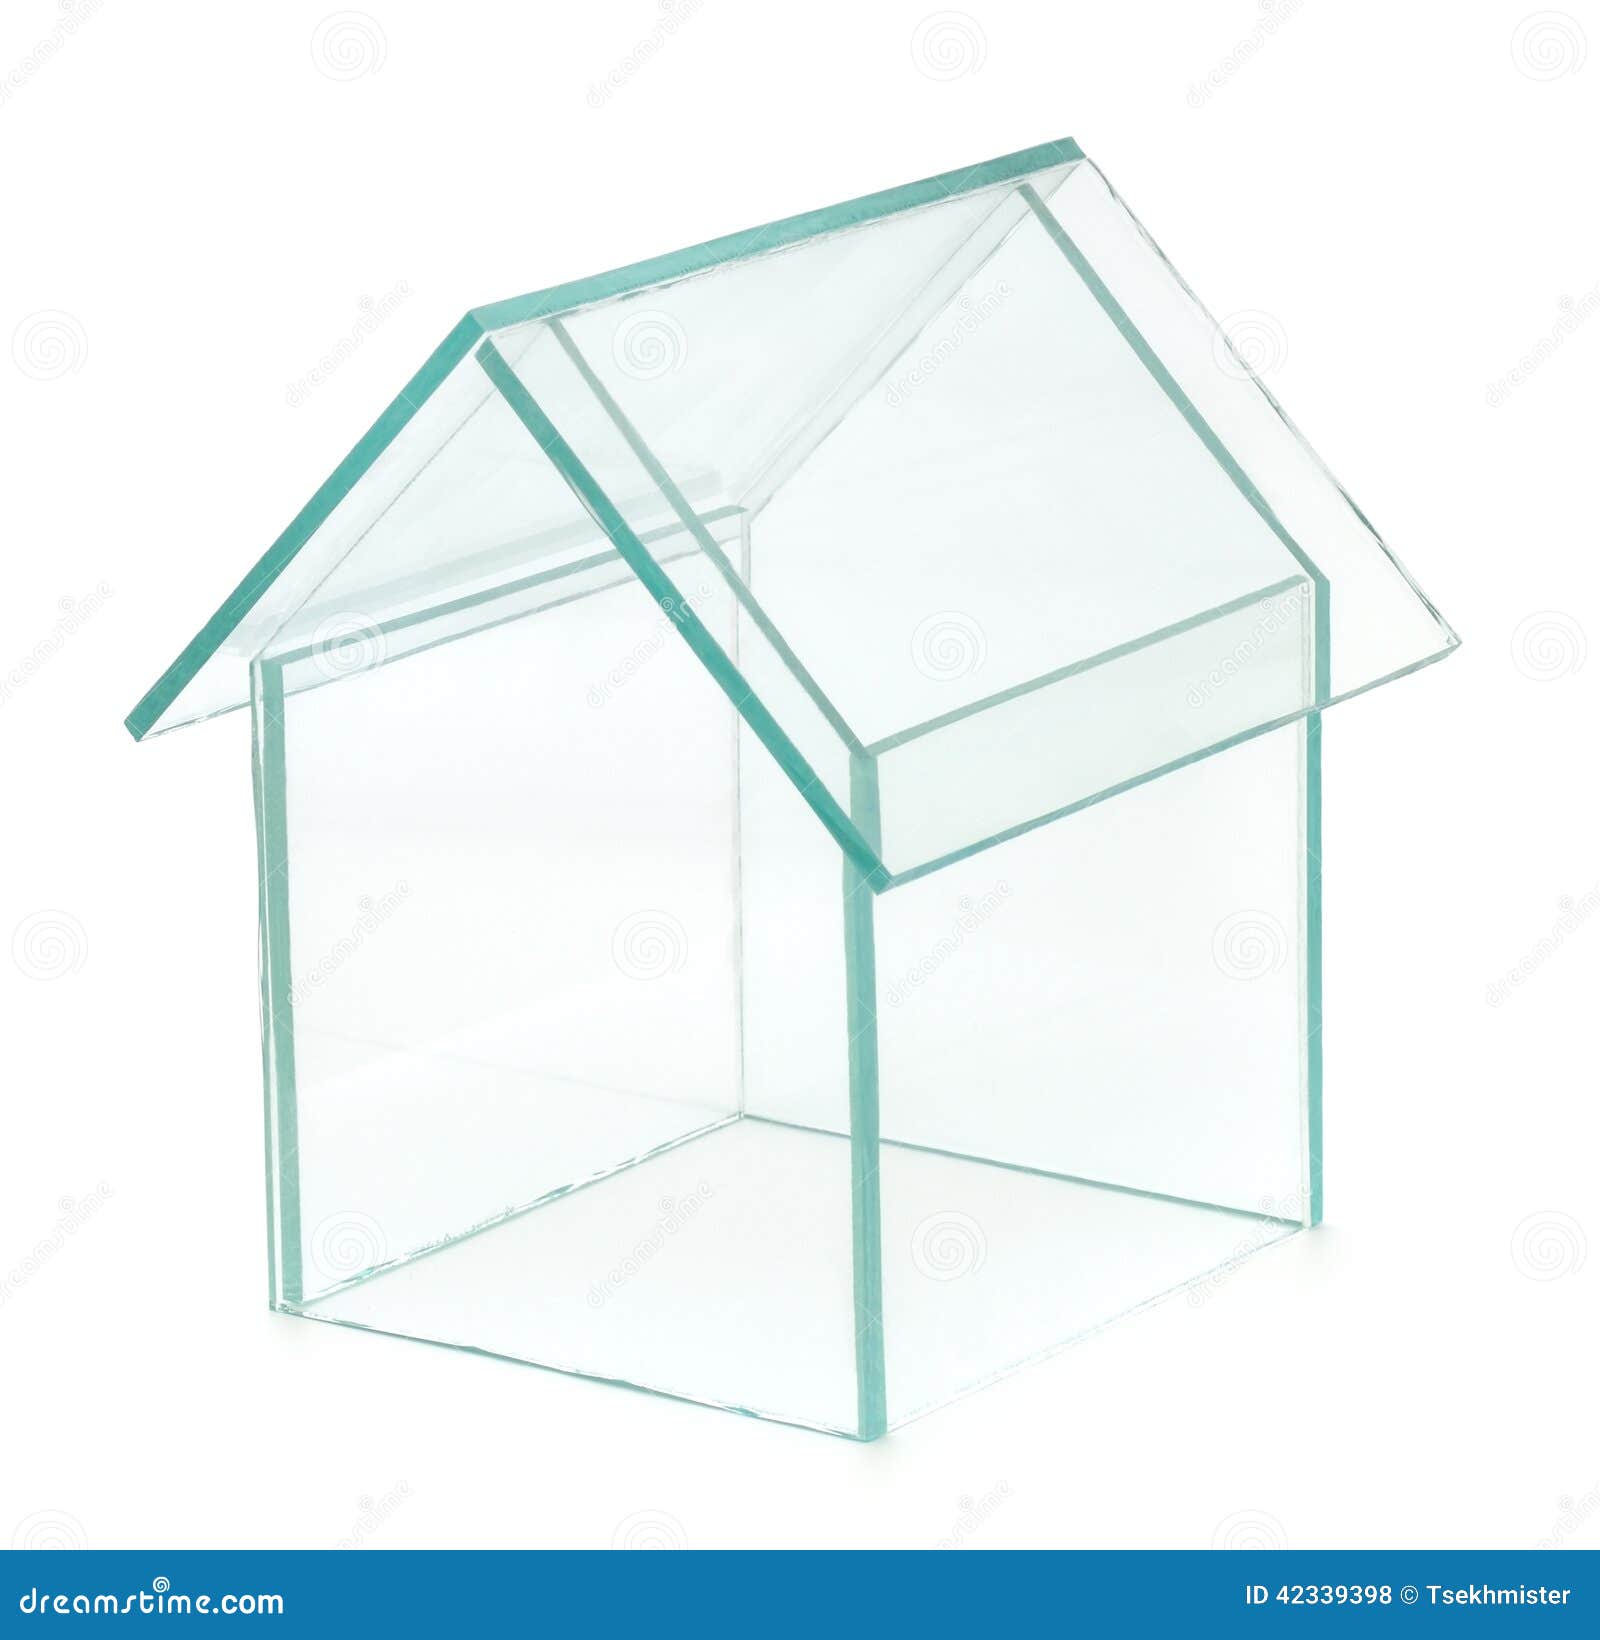 403758 Glass House Stock Photos, Images & Pictures